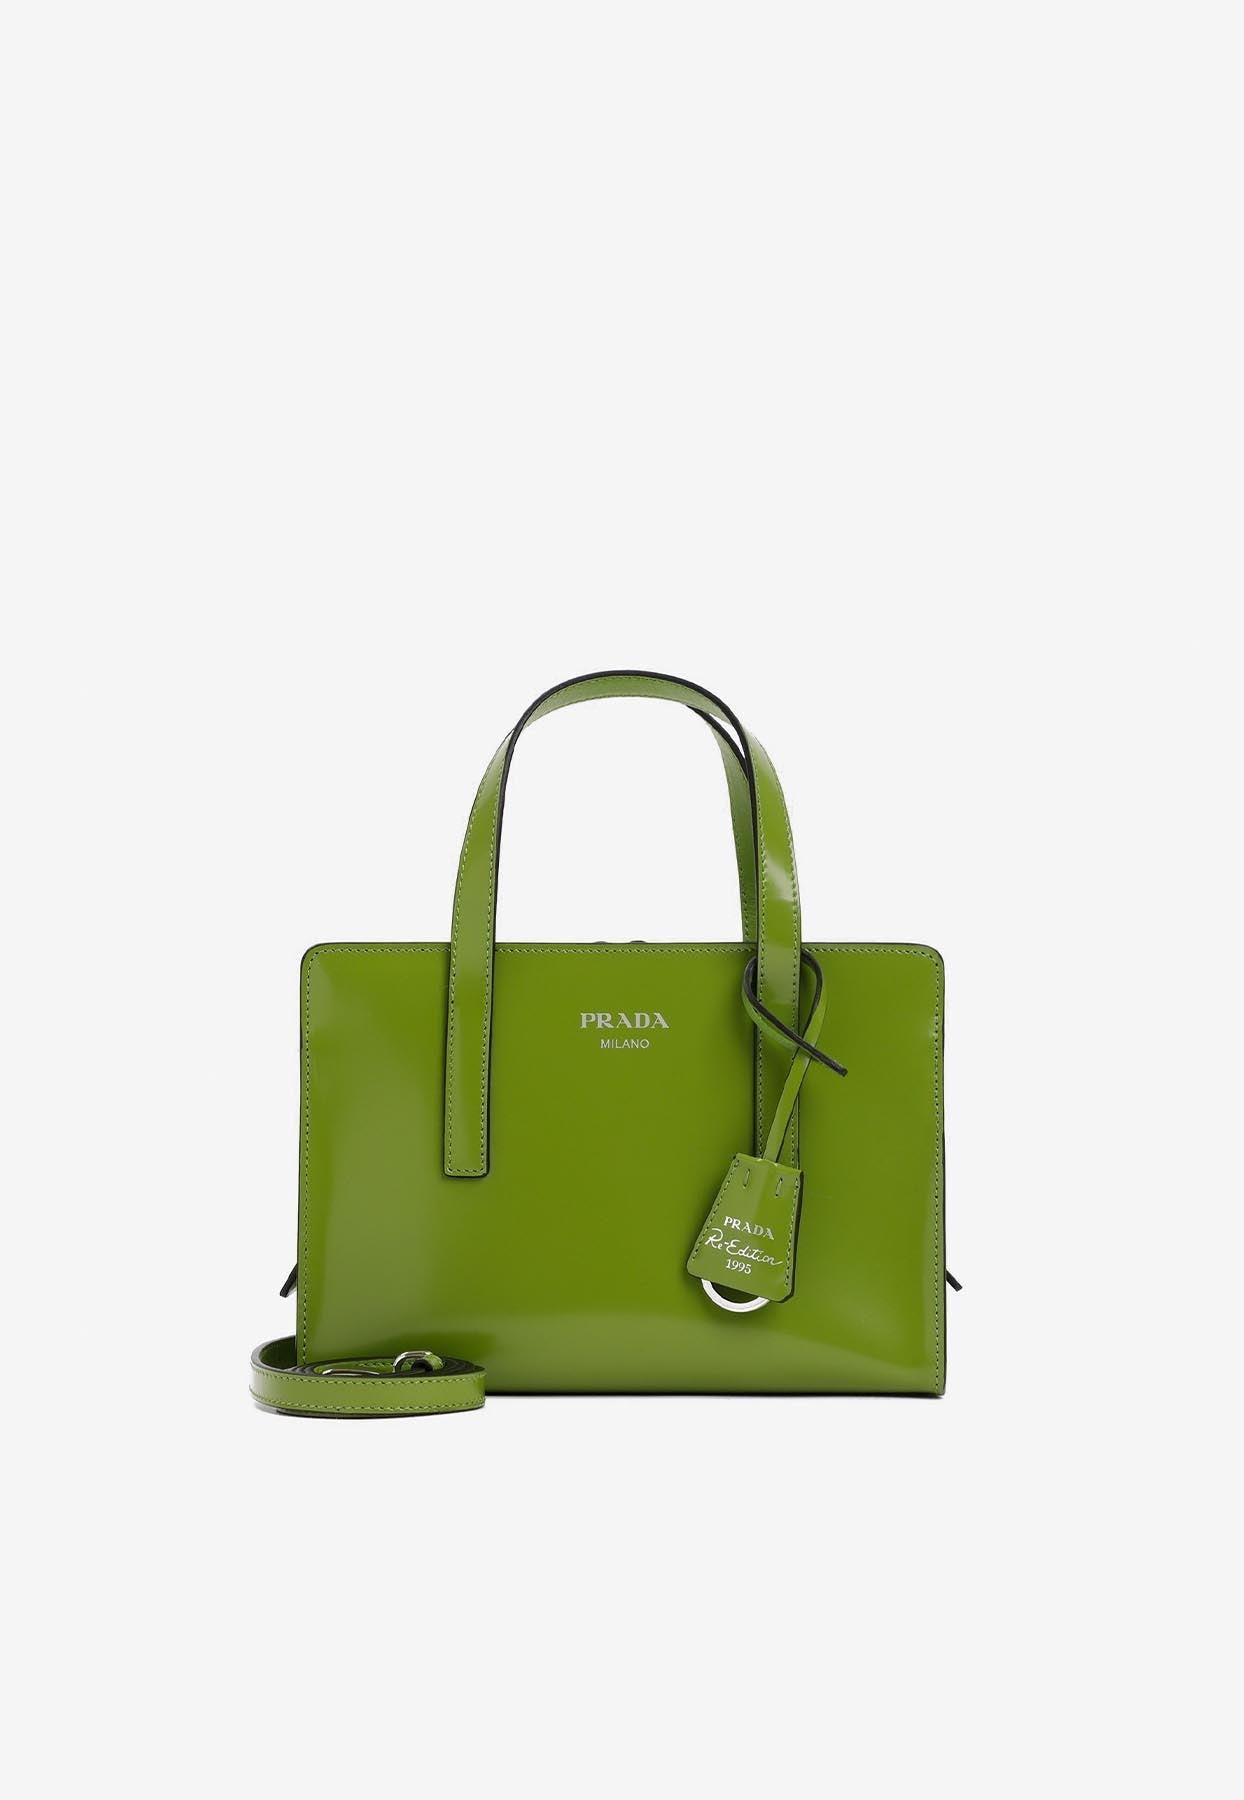 Prada Re-edition 1995 Tote Bag In Leather in Green | Lyst